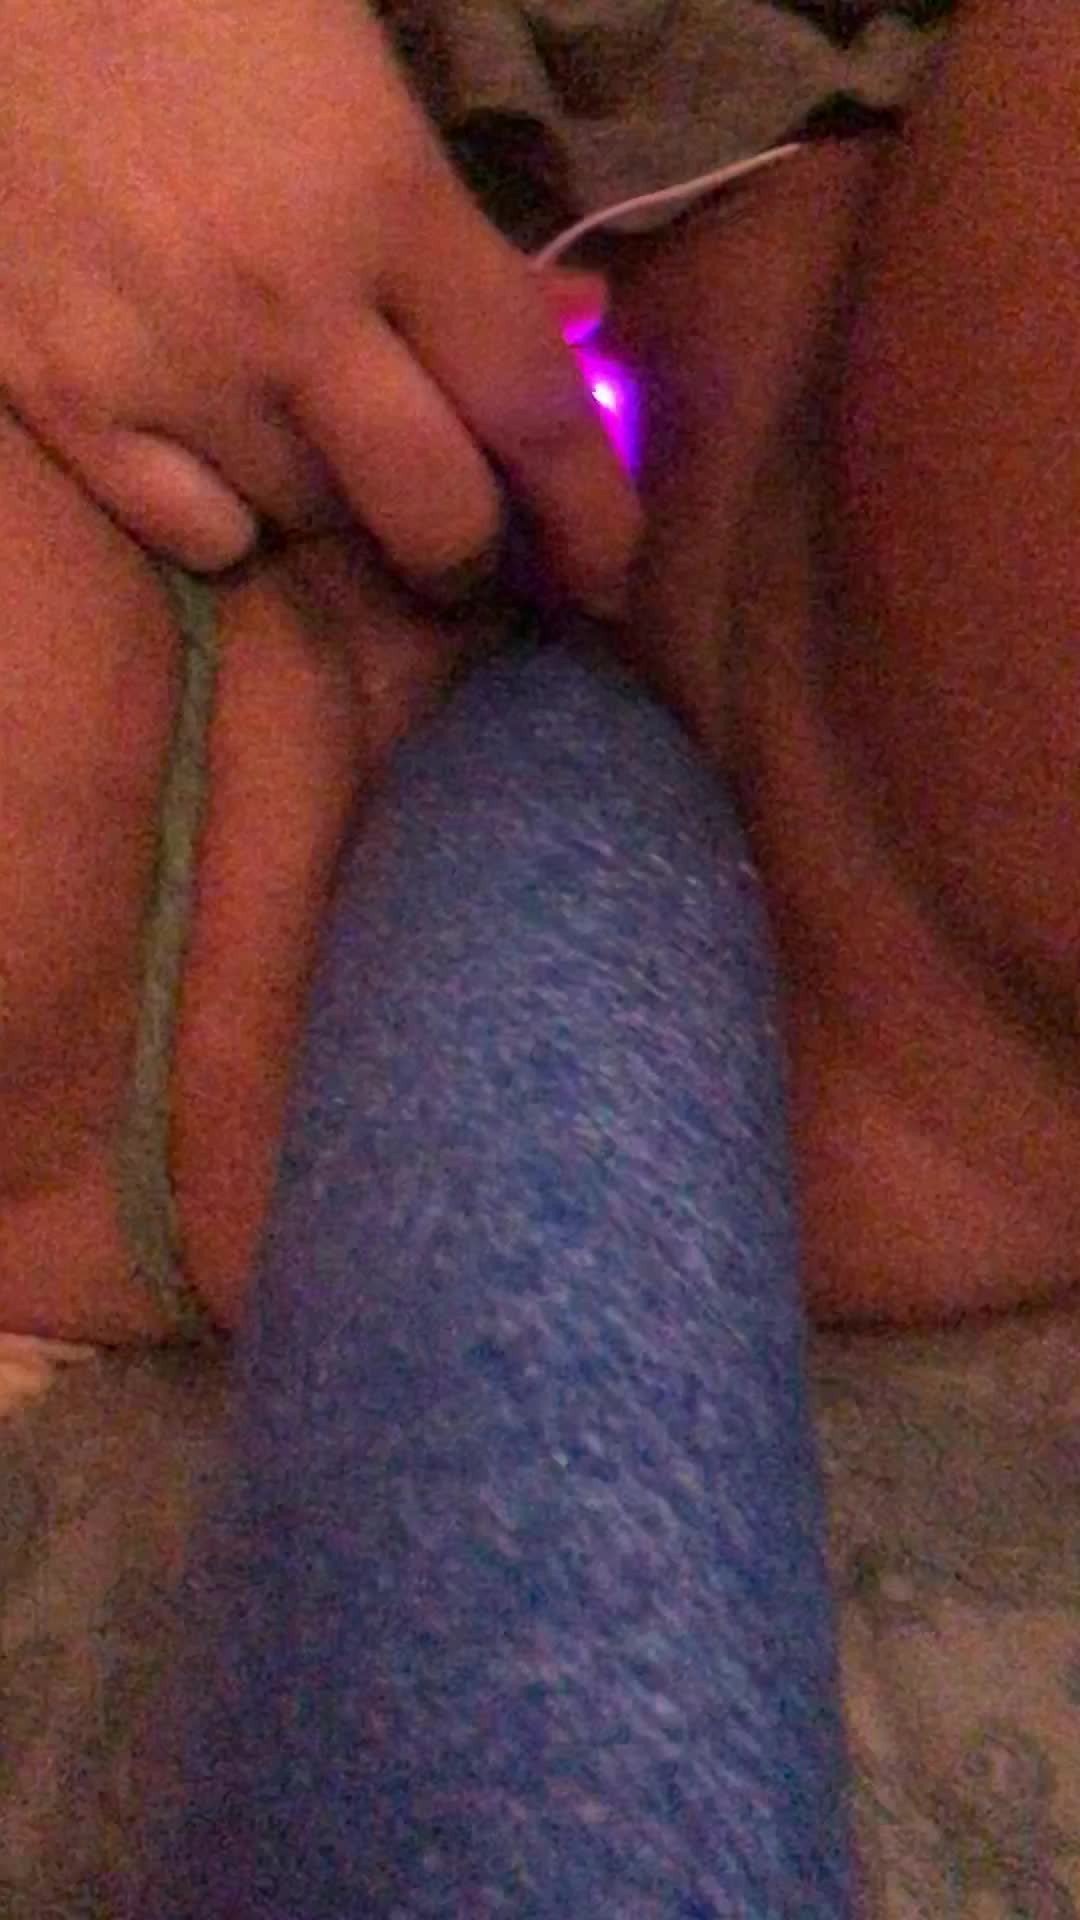 Fucked wife with pool noodle